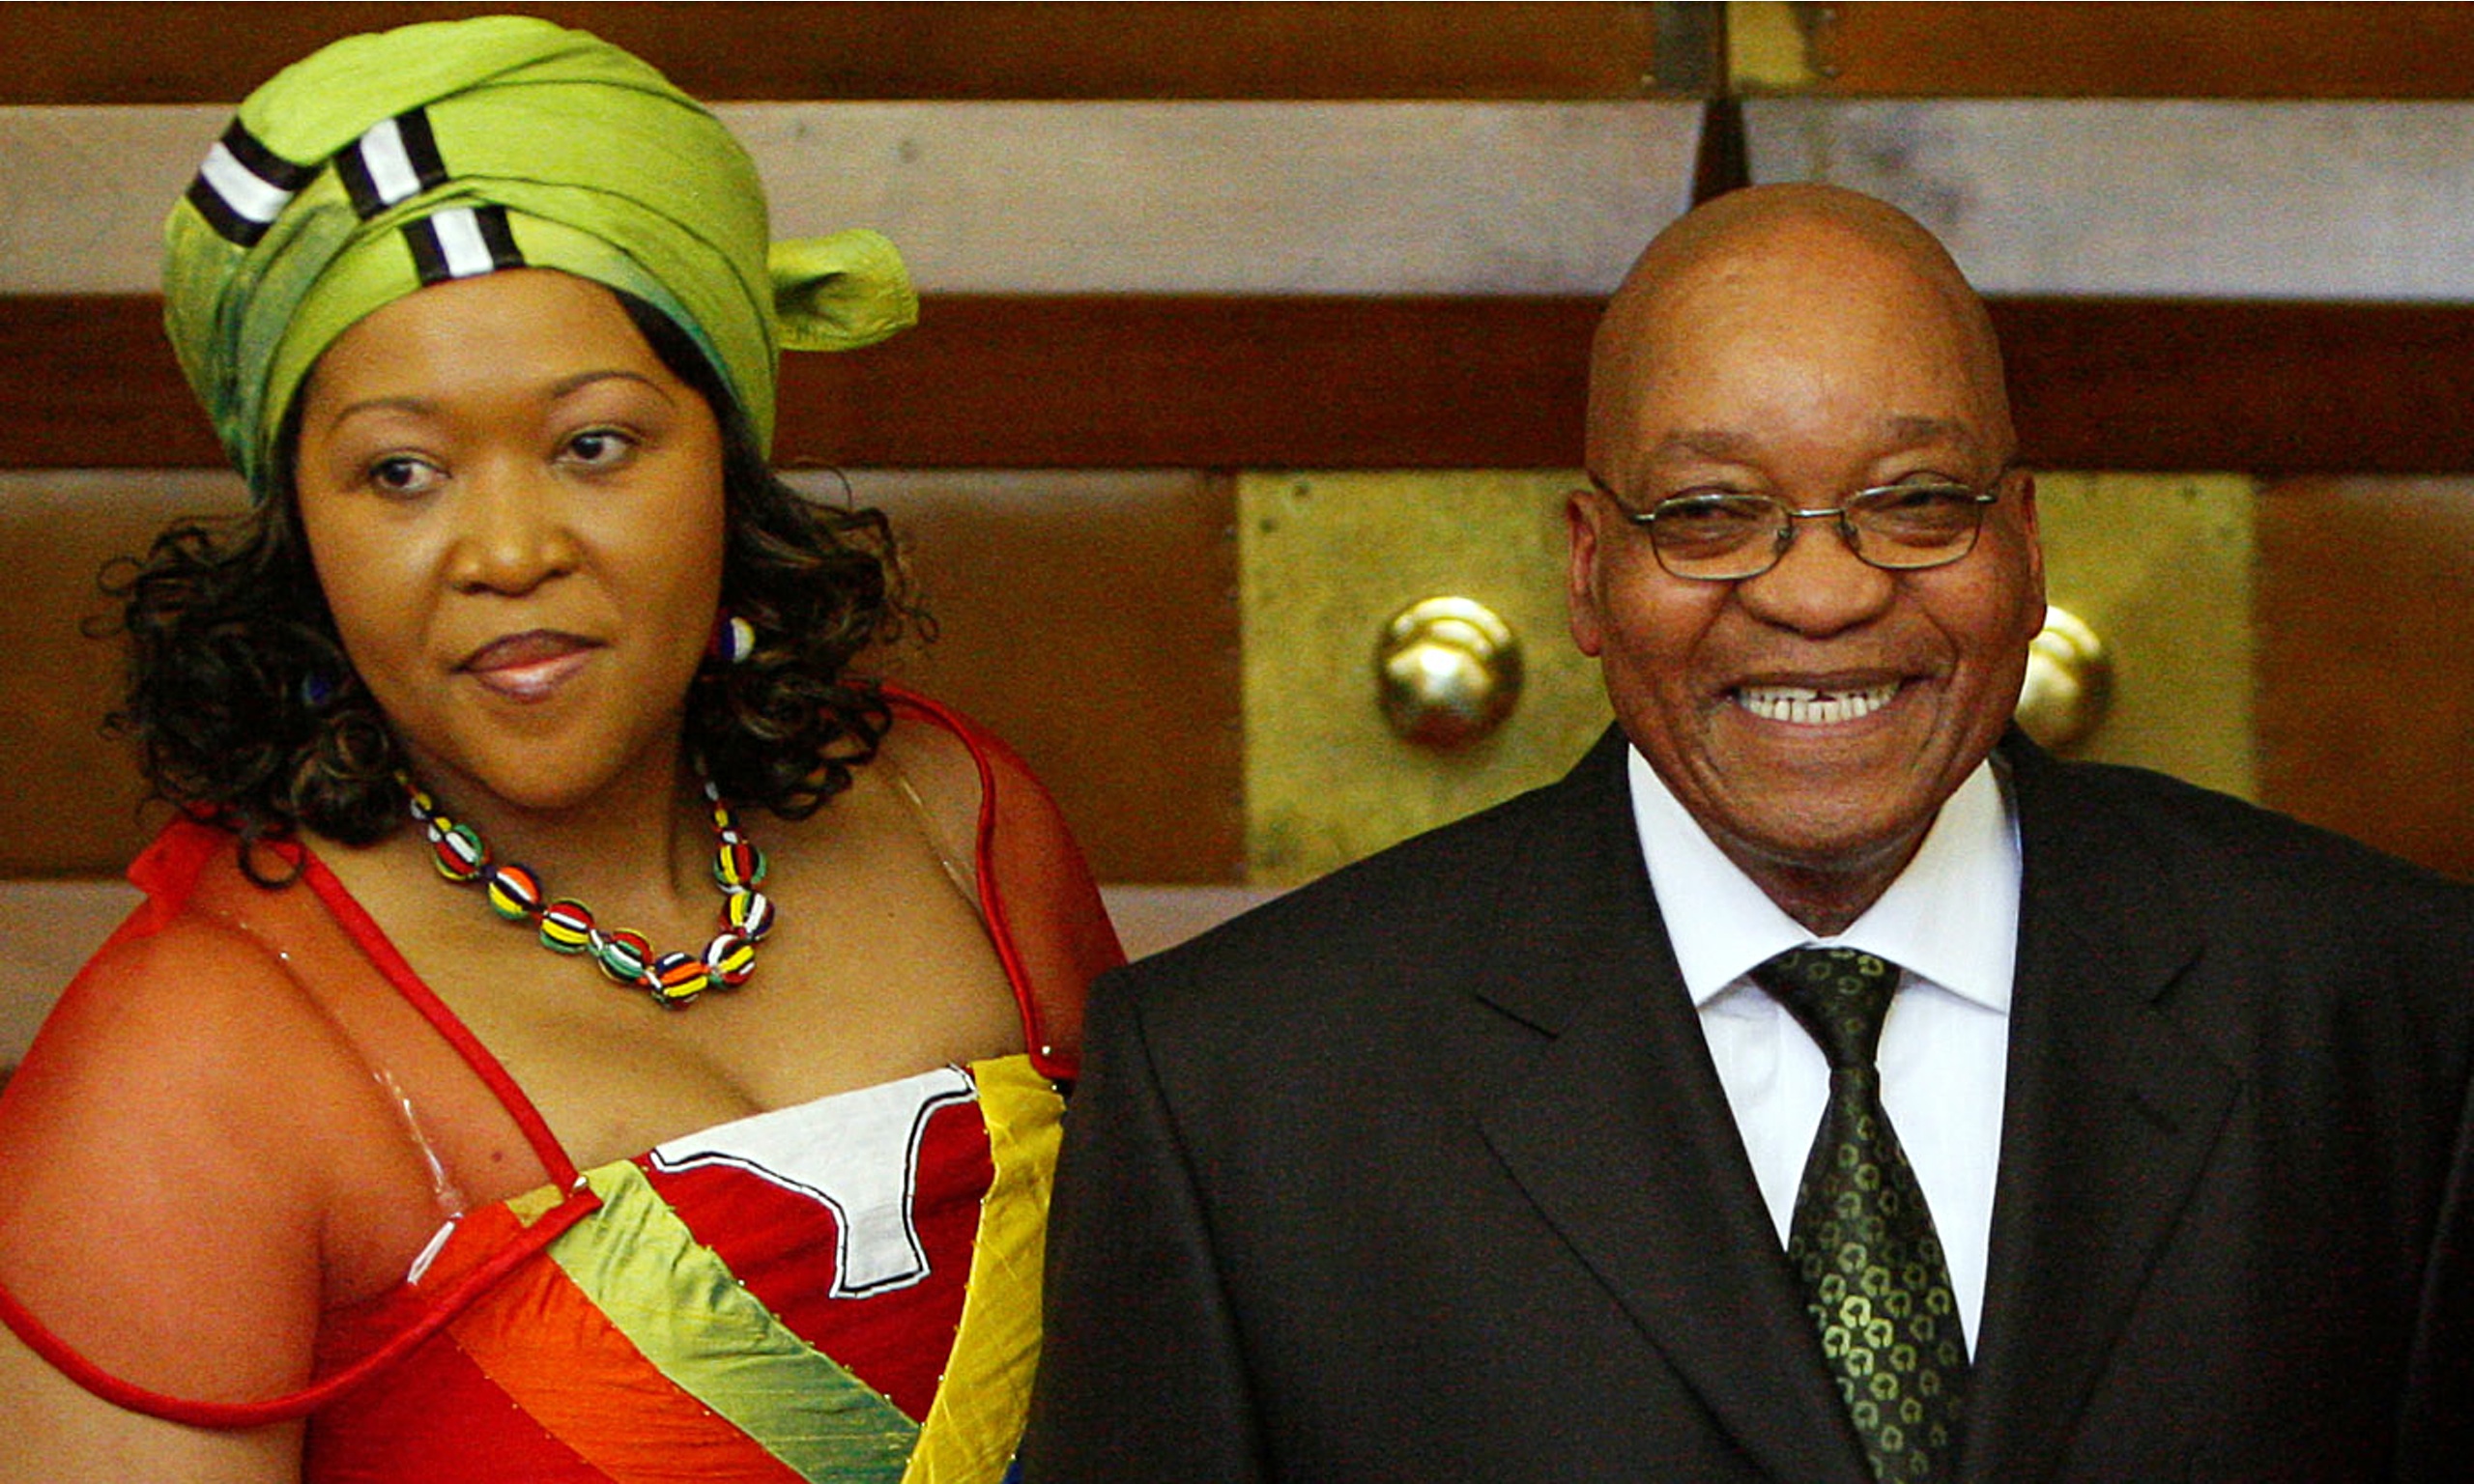 Read cnn's fast facts about the life of jacob zuma and learn more abou...